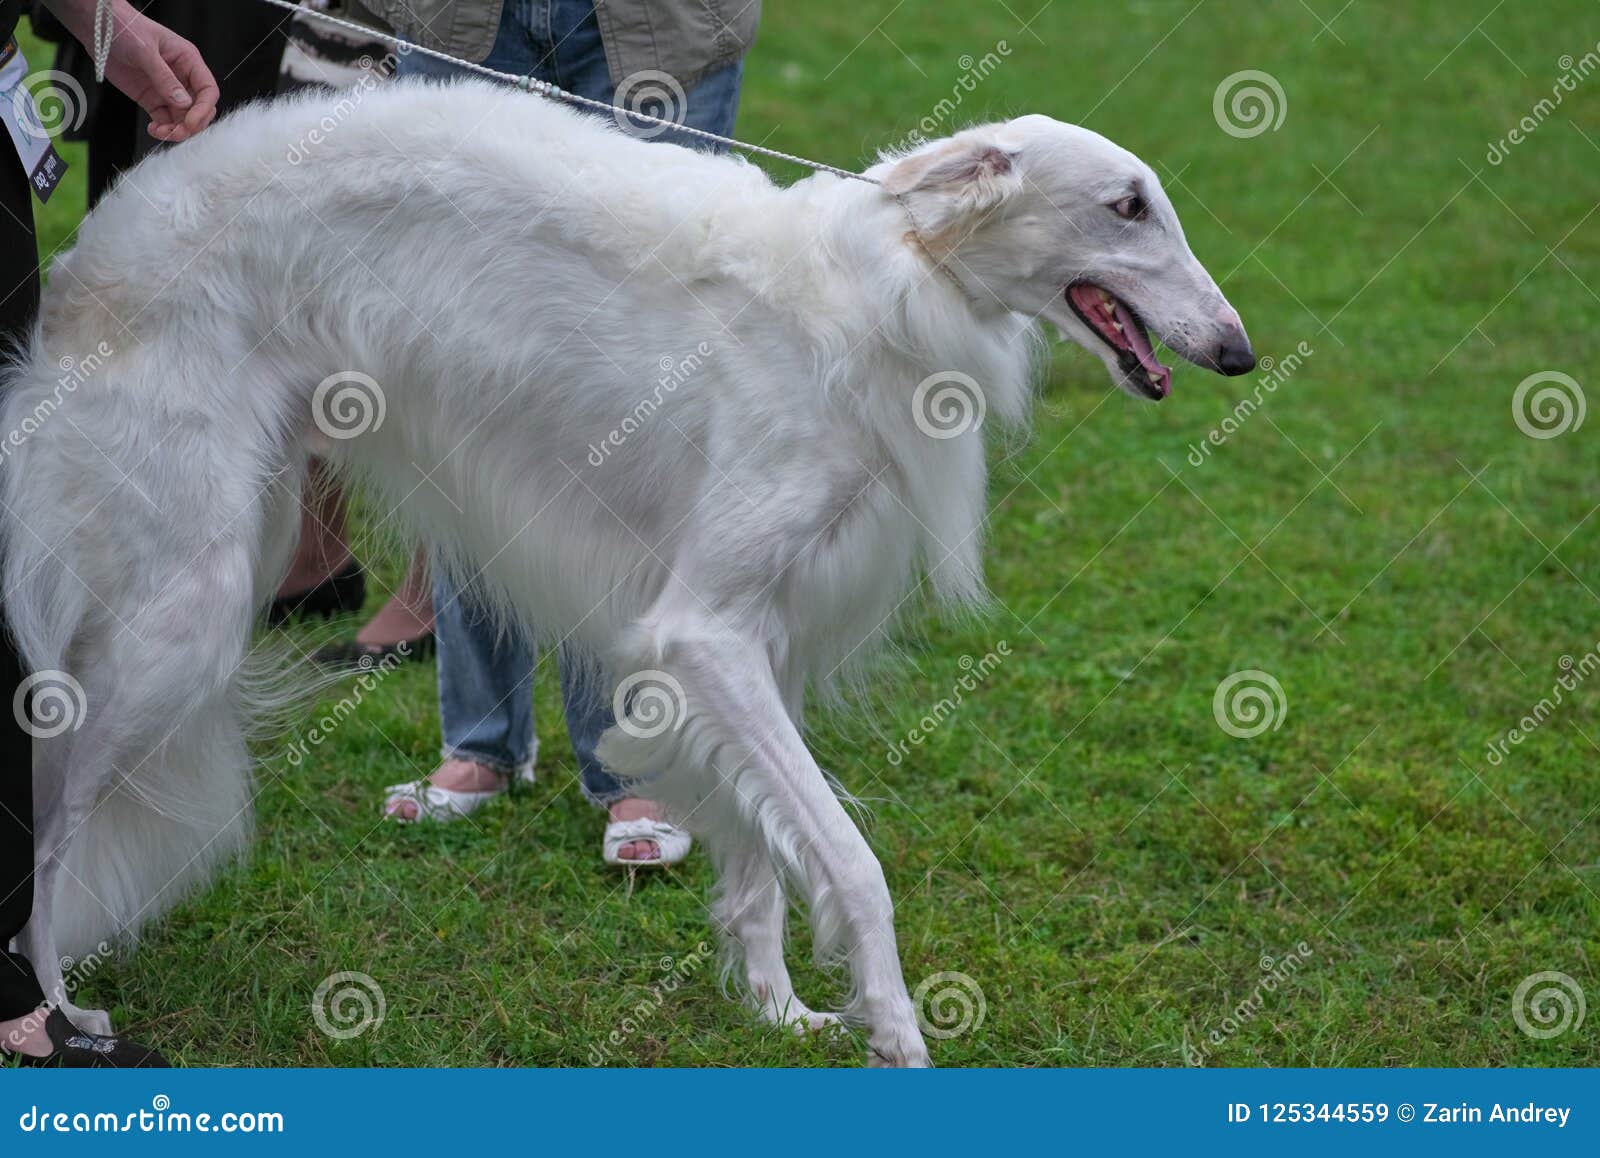 Greyhound Dog with Long White Hair Close-up Stock Image - Image of field,  animal: 125344559